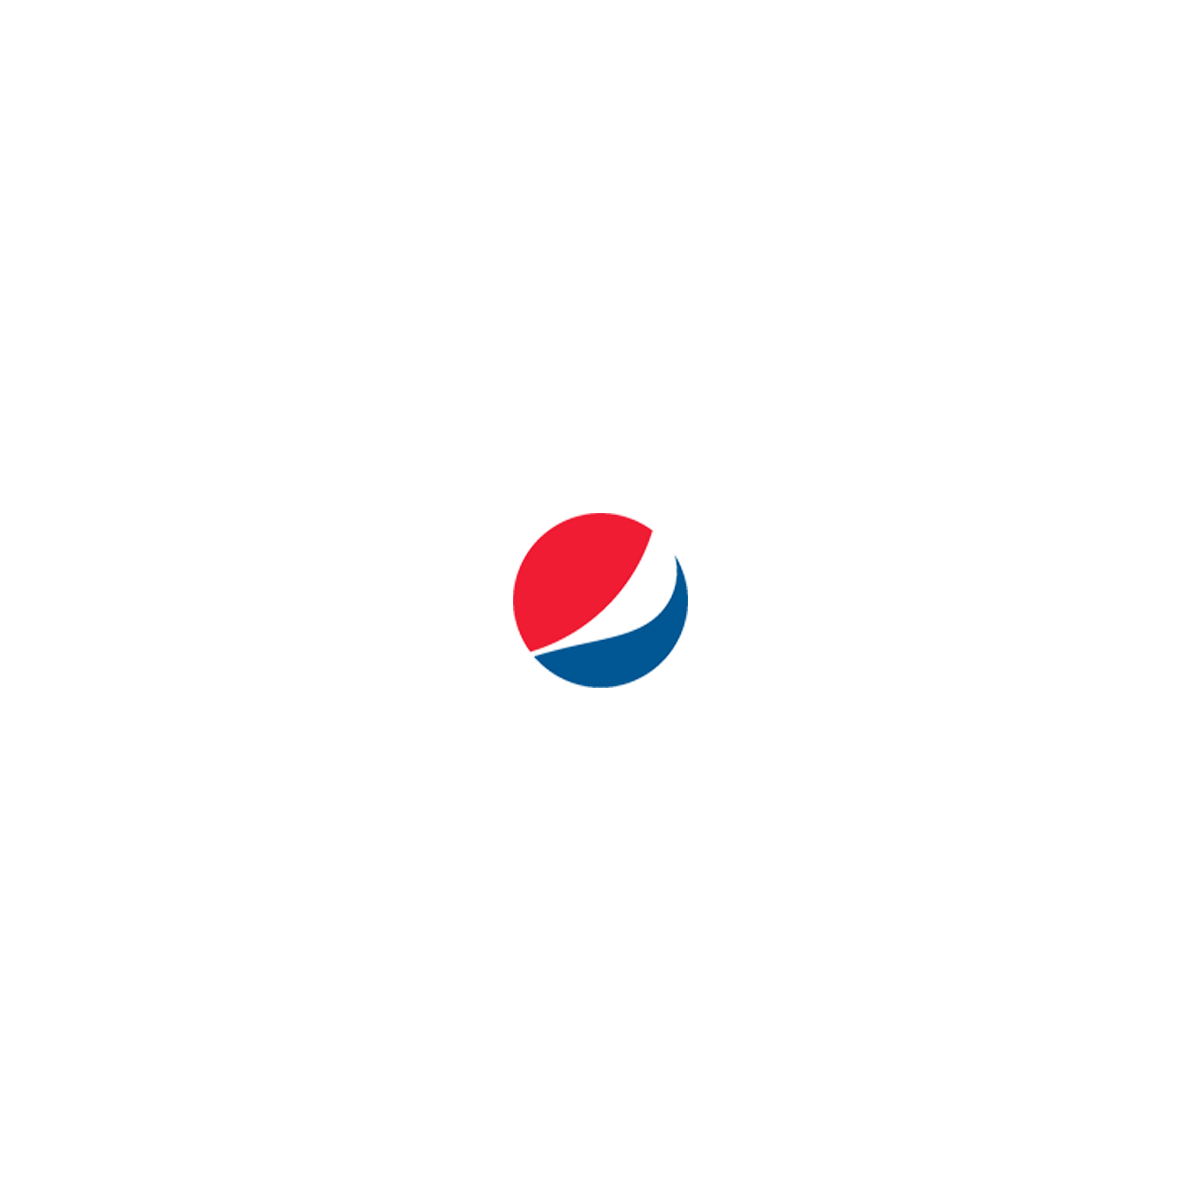 Pepsi Globe Logo - 70 years of Pepsi in Egypt and the brand journey continues | Think ...